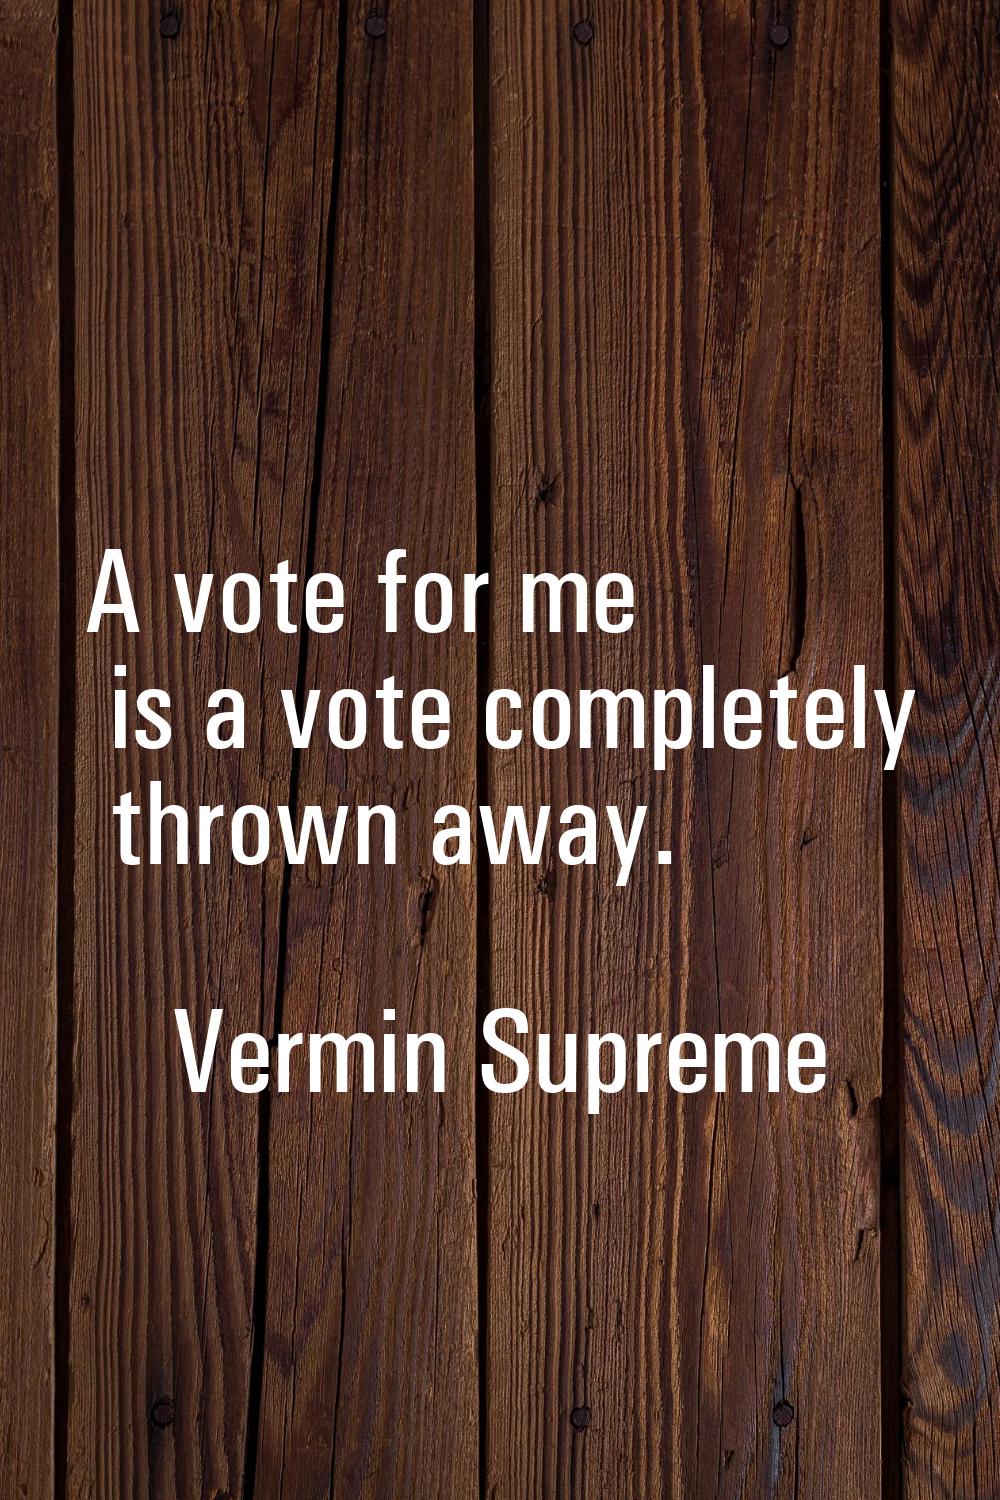 A vote for me is a vote completely thrown away.